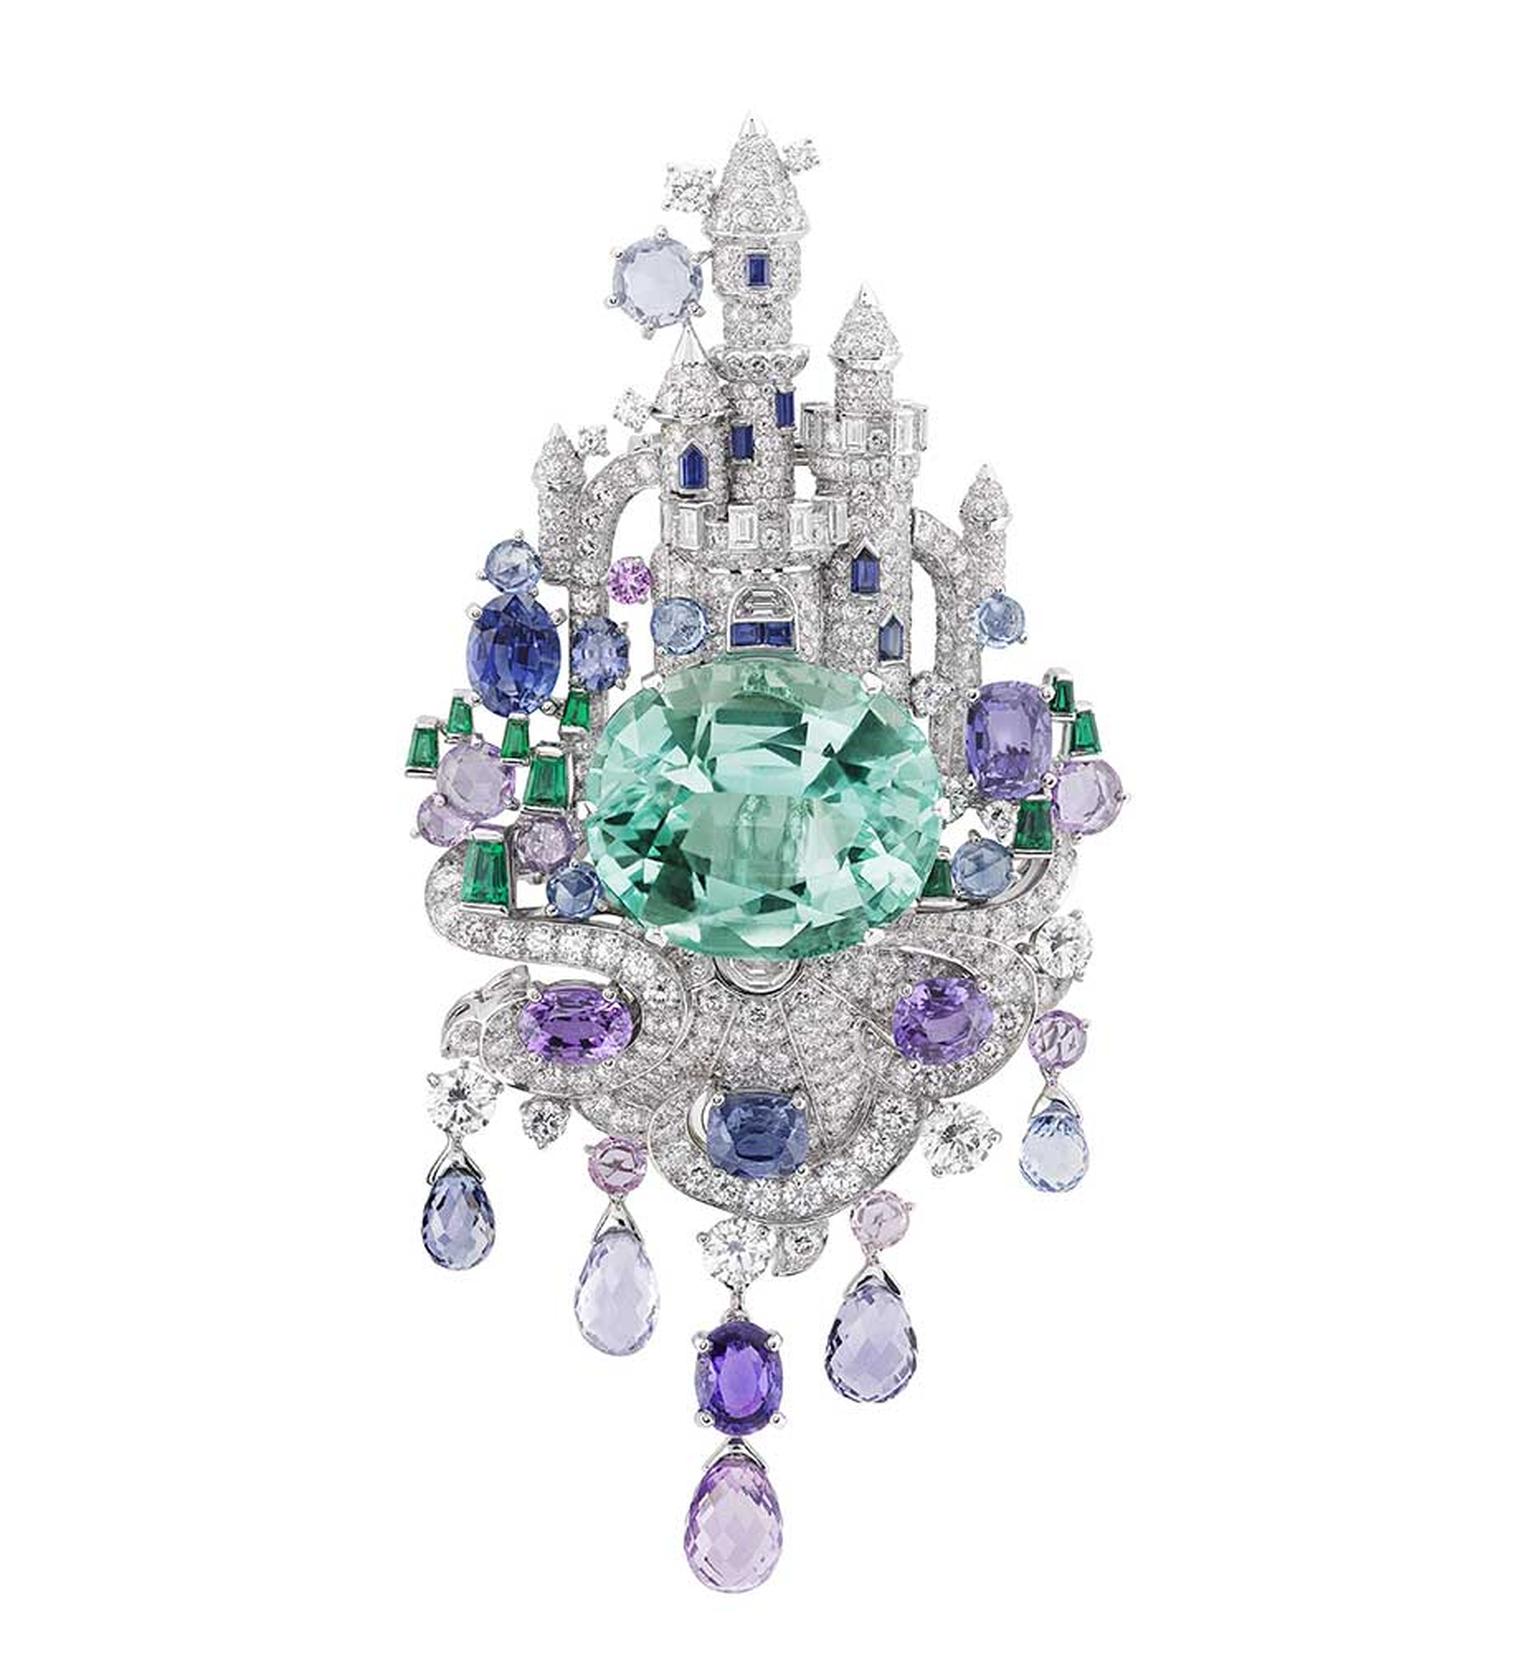 Van Cleef & Arpels Peau d'Âne collection white gold Enchanted Castle brooch with multiple cut diamonds, emeralds, sapphires and briolette gemstones surrounding a 39ct oval cut emerald.